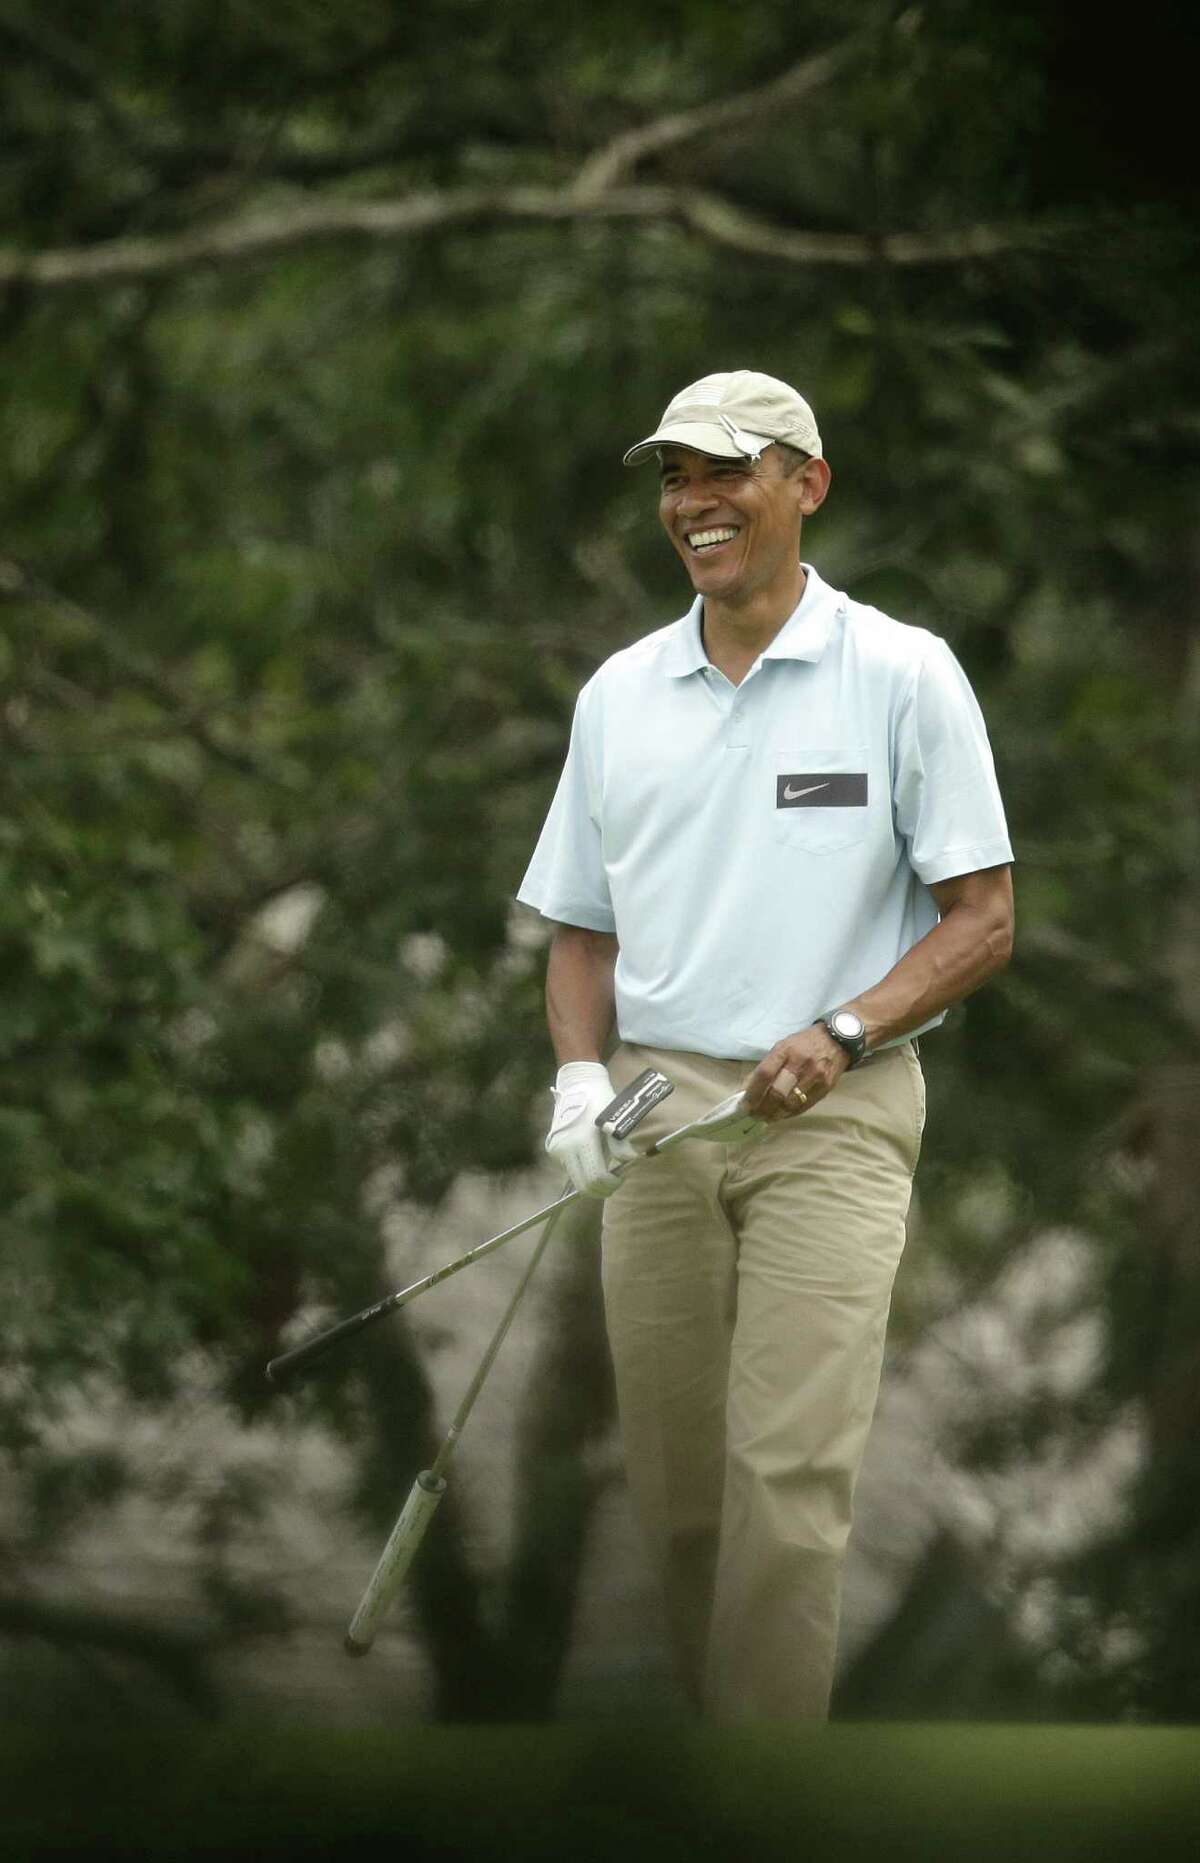 President Barack Obama enjoys a round of golf at Martha's Vineyard, Mass. As crises engulf the globe, a reader calls the president an absentee landlord of the White House whose chief function is fundraising.